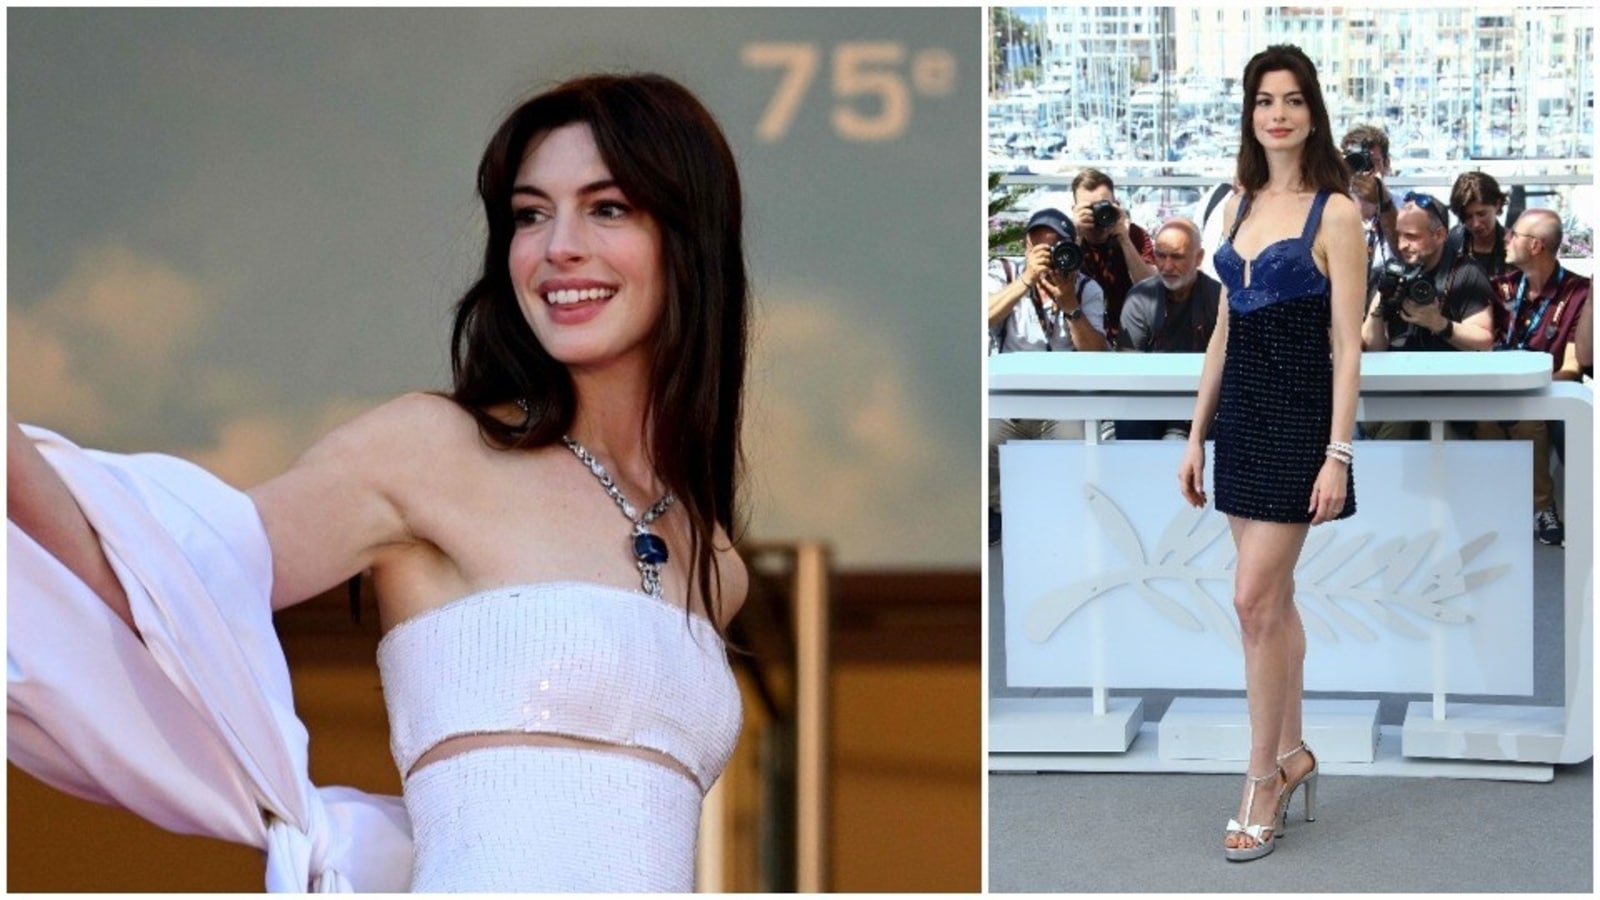 Gucci - During the Cannes Film Festival, Anne Hathaway was